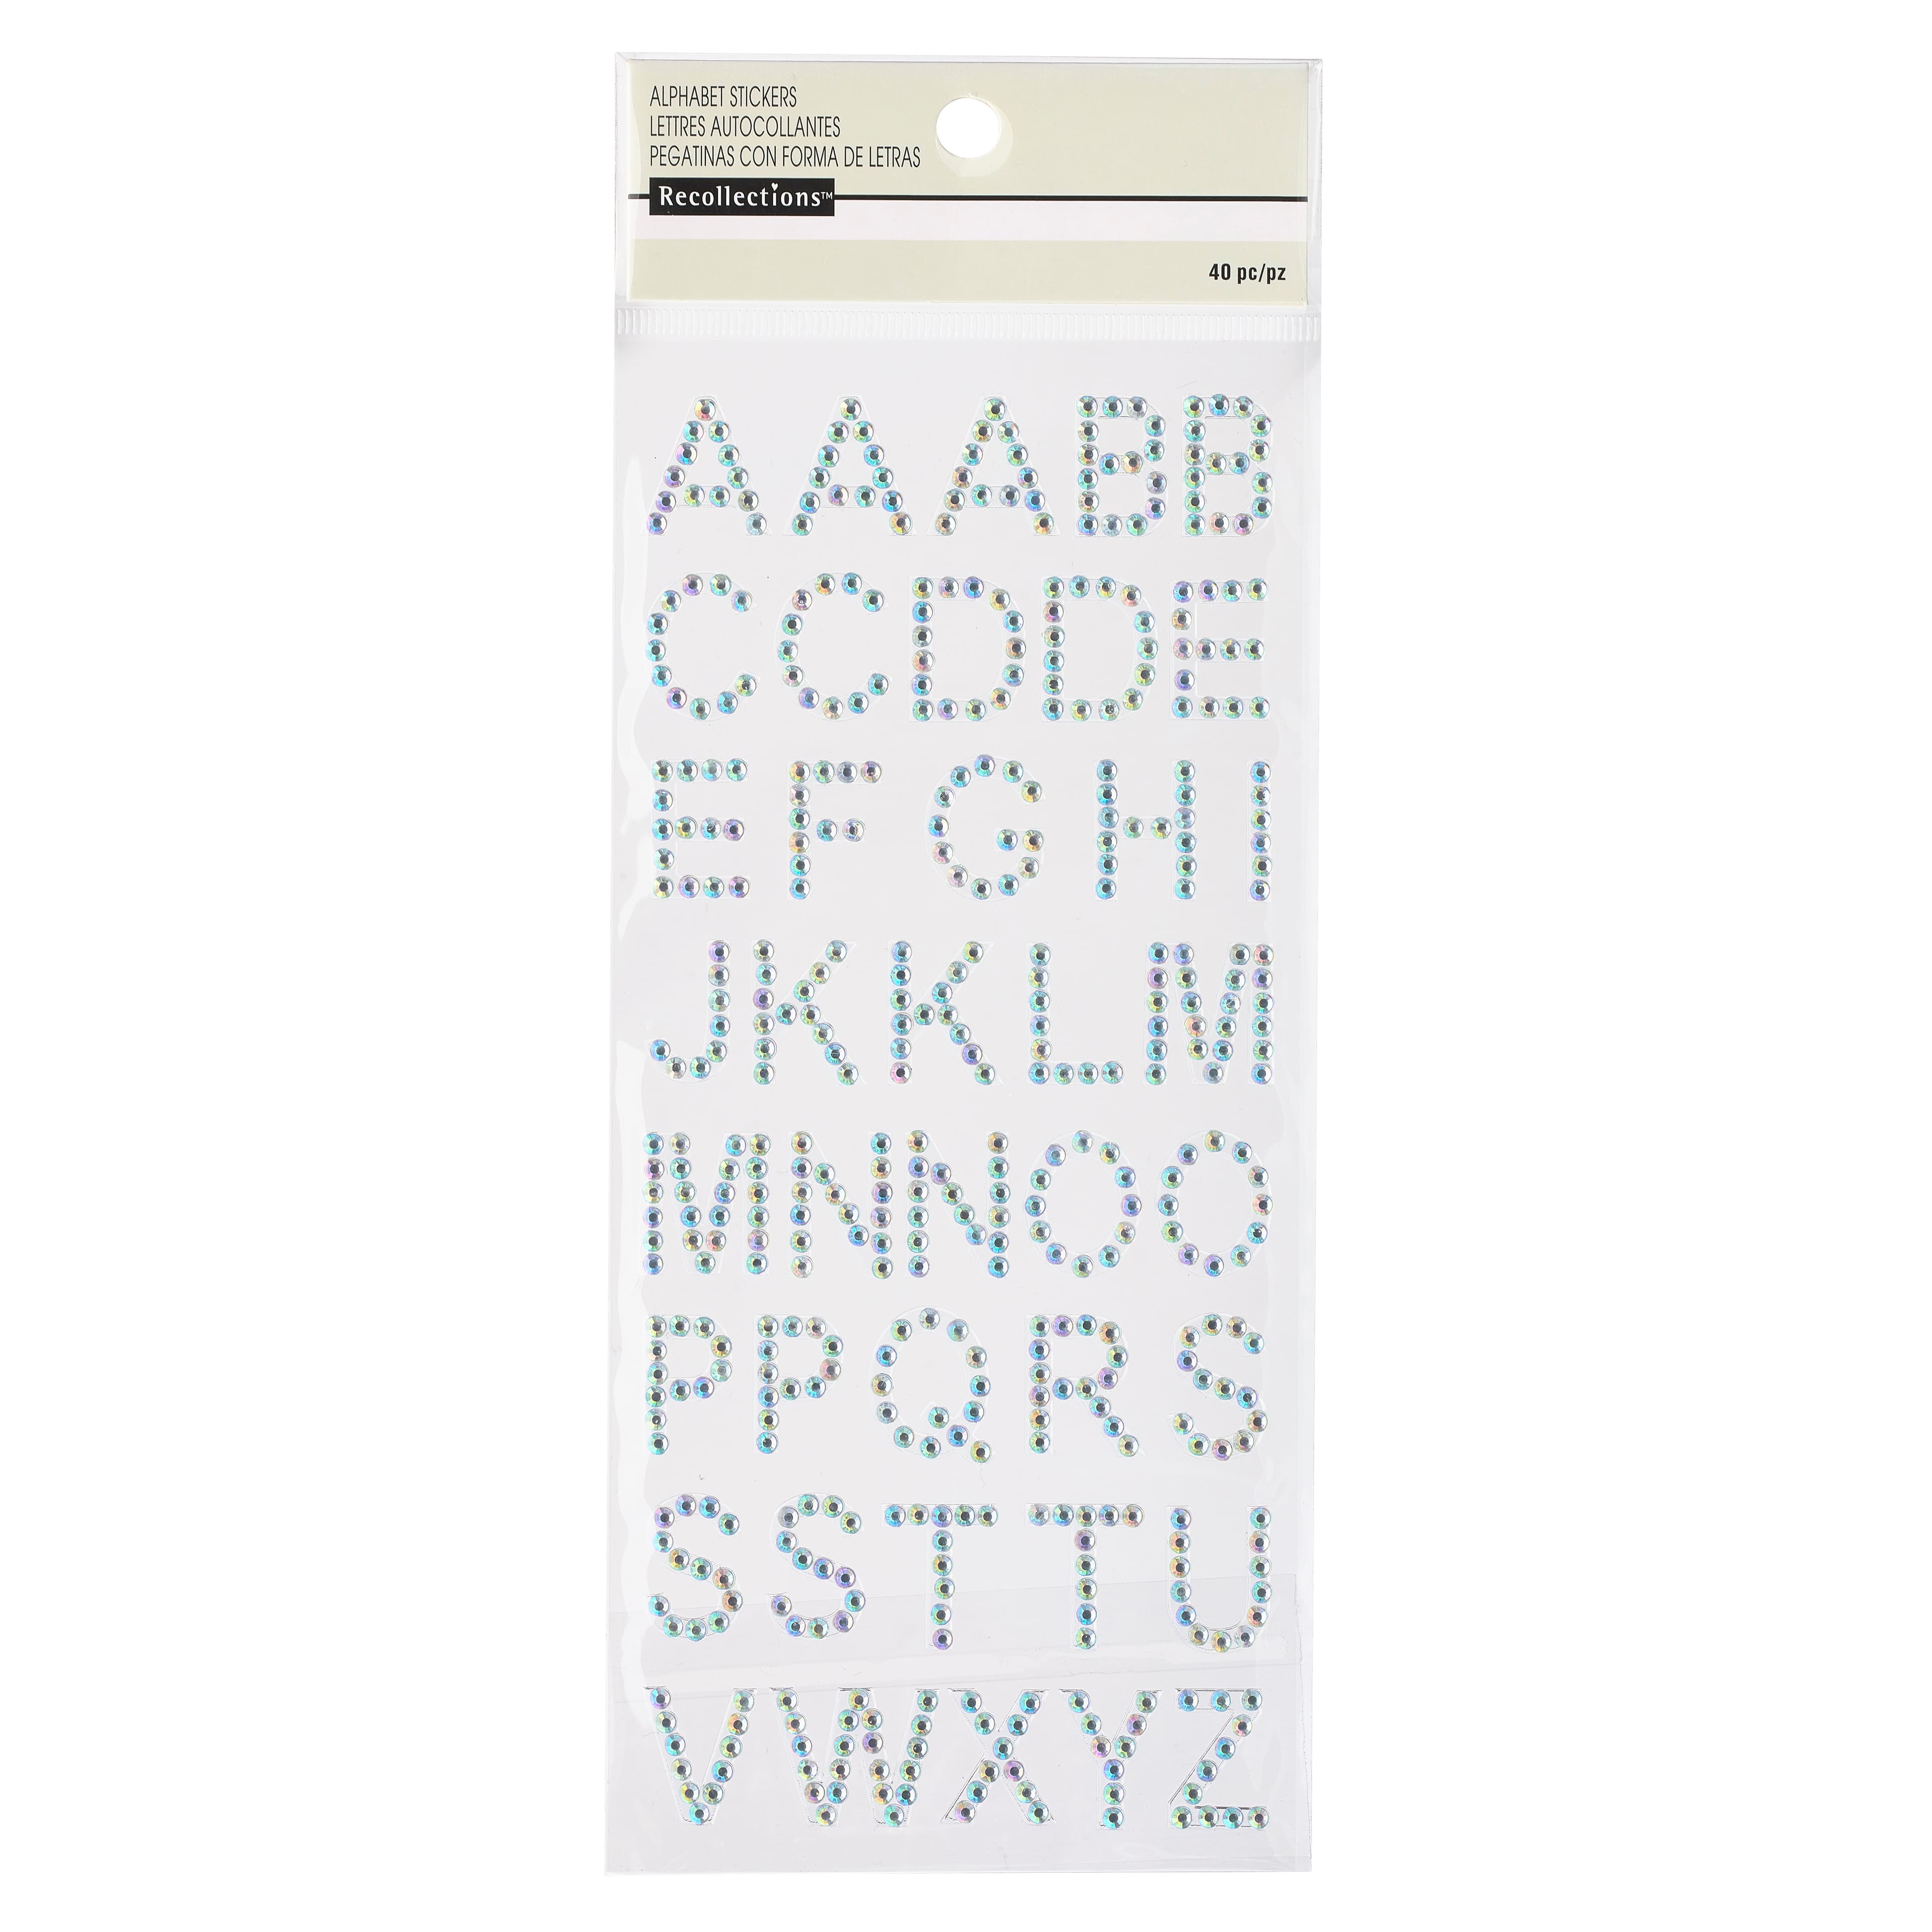 Recollections 40 Rhinestone Letters Alphabet Stickers - Each